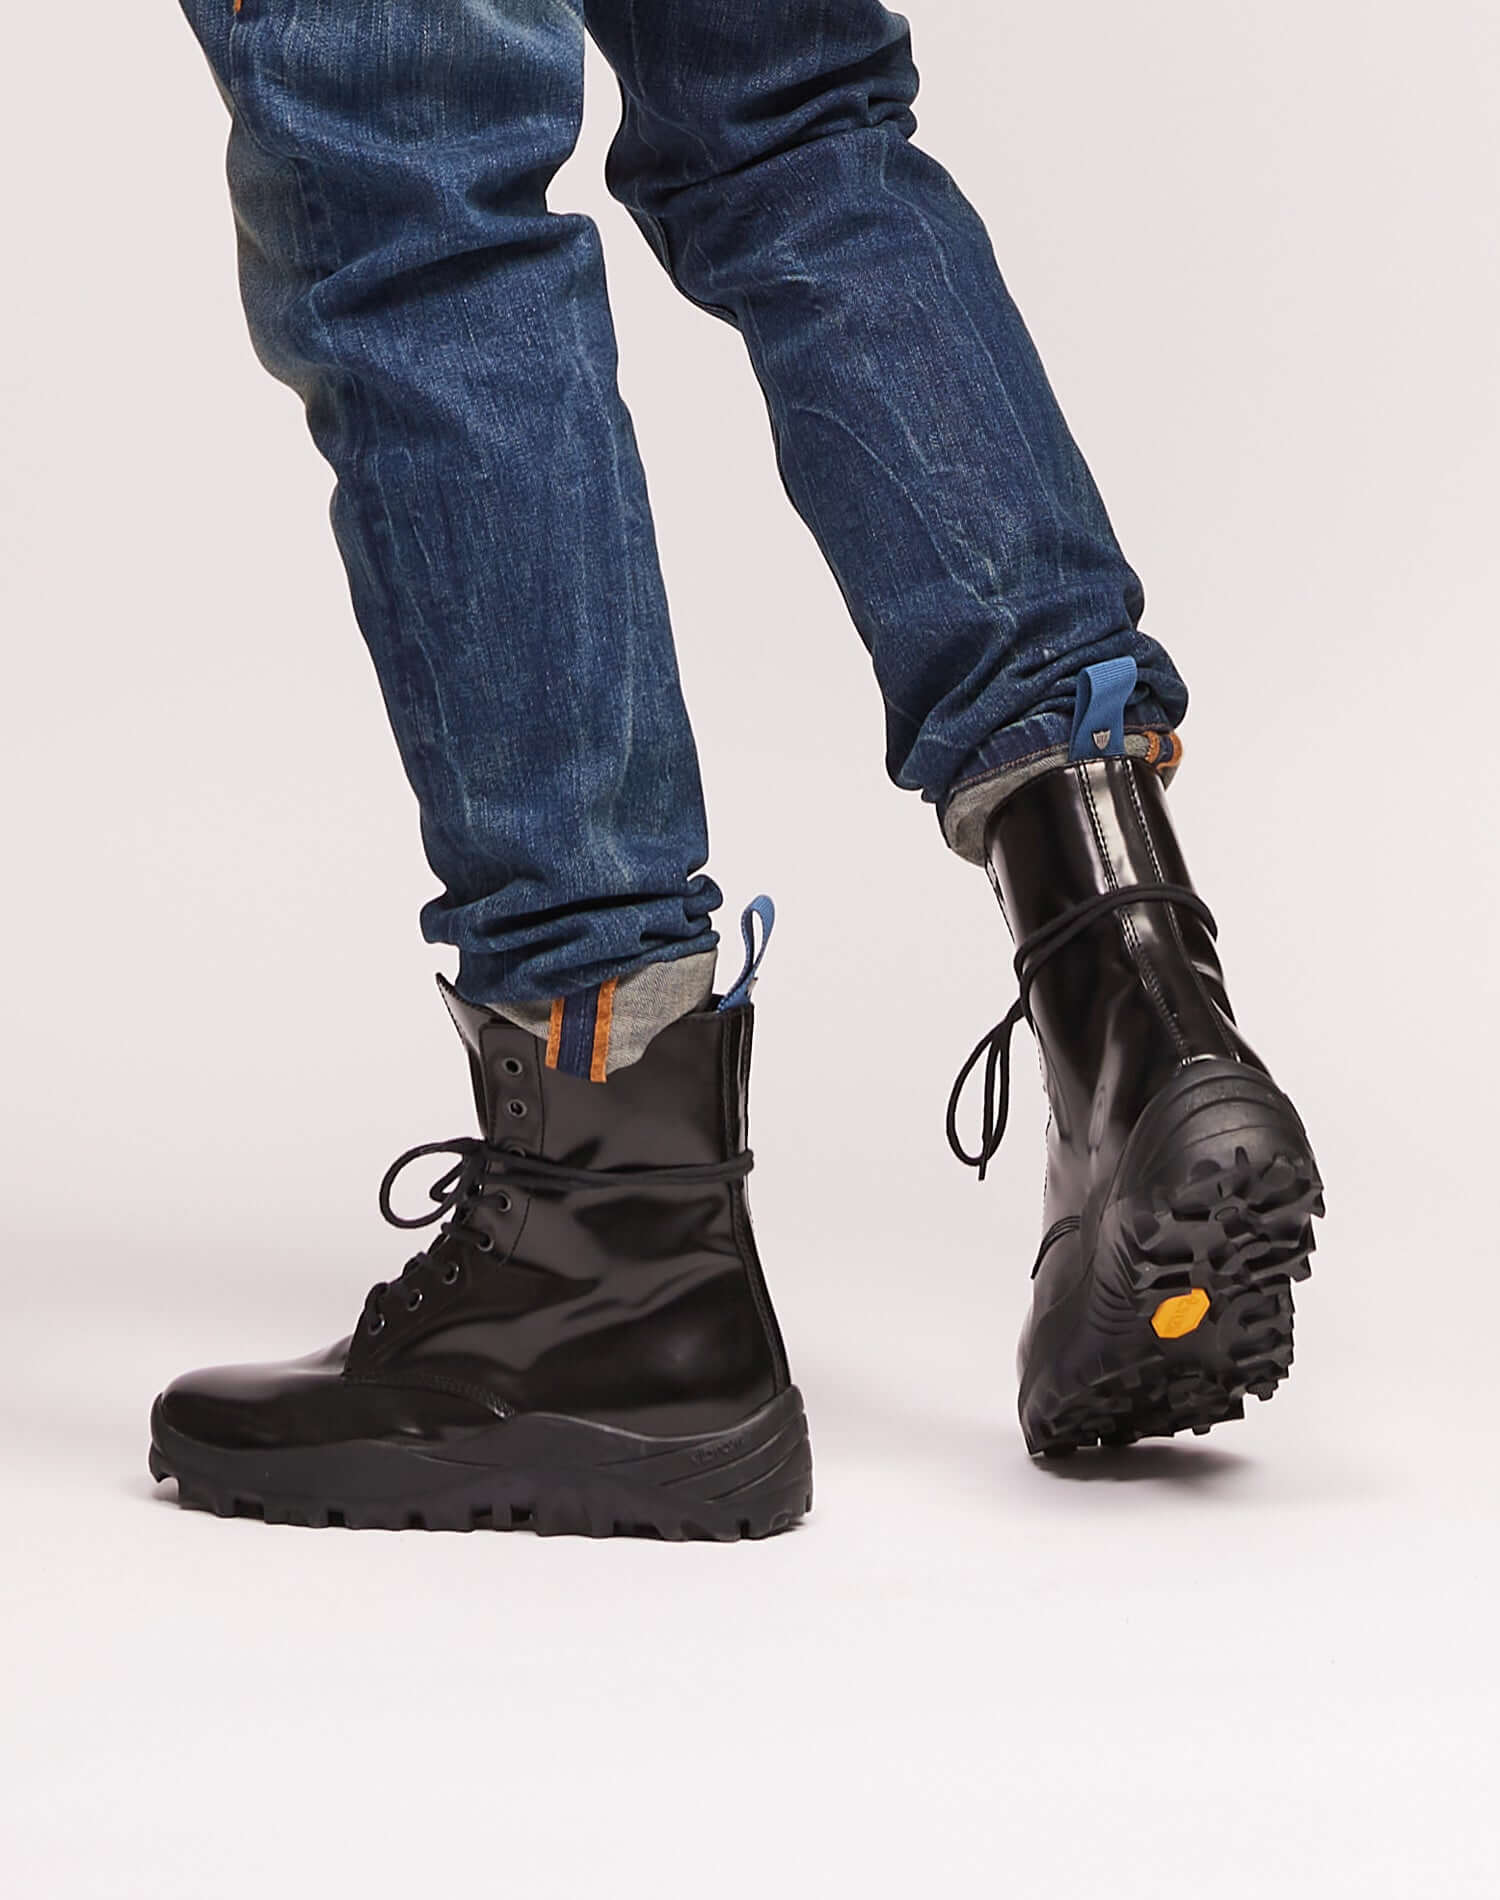 L.A. COMBAT BOOT Leather boots with laces. Vibram Sole. Made in Italy HTC LOS ANGELES